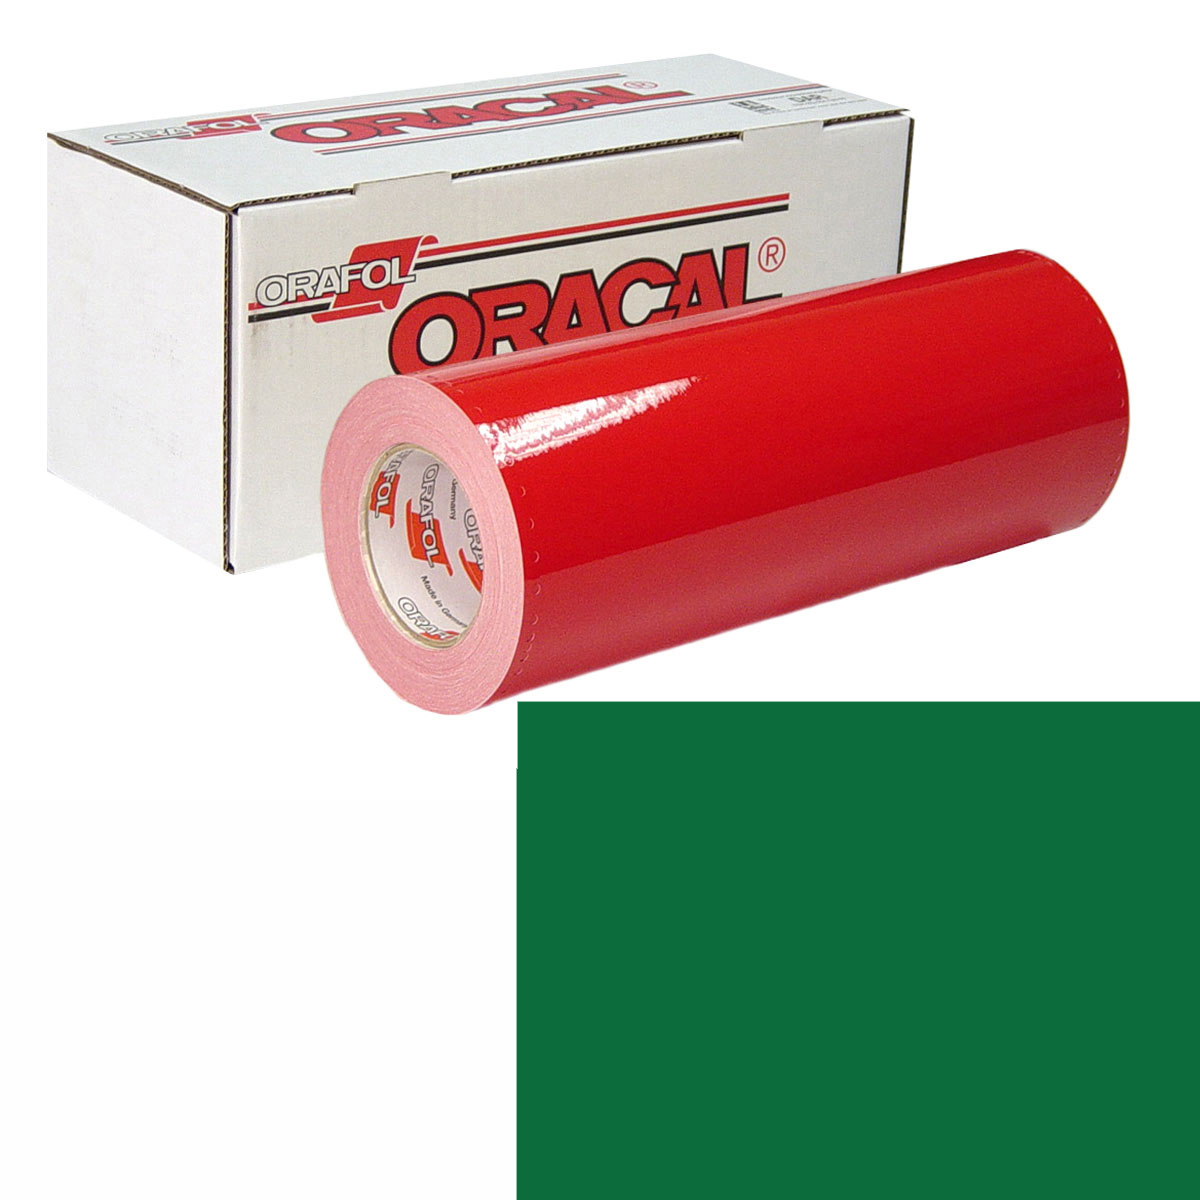 ORACAL 951 30in X 10yd 612 Police Green